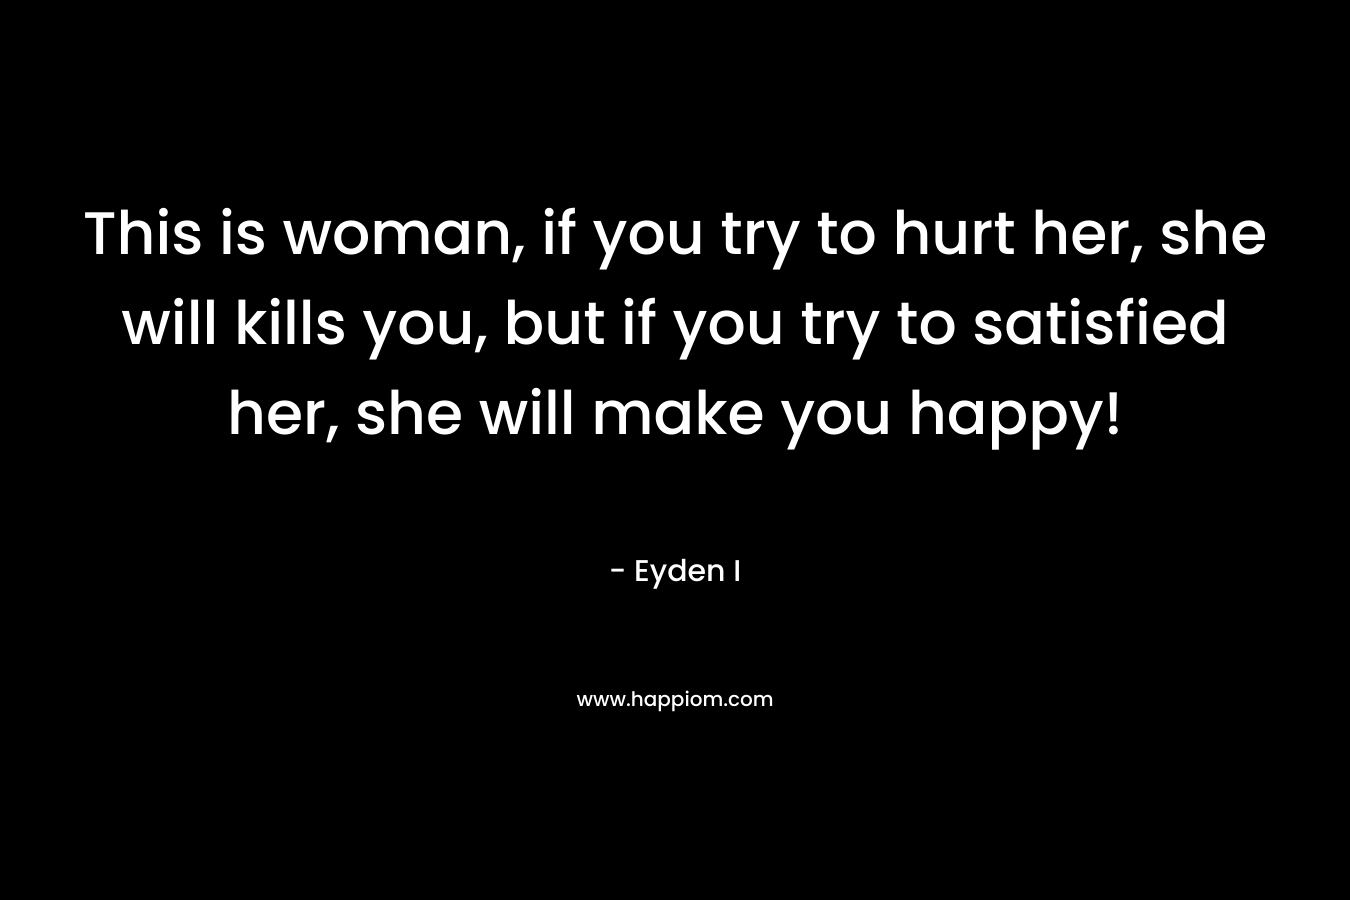 This is woman, if you try to hurt her, she will kills you, but if you try to satisfied her, she will make you happy!